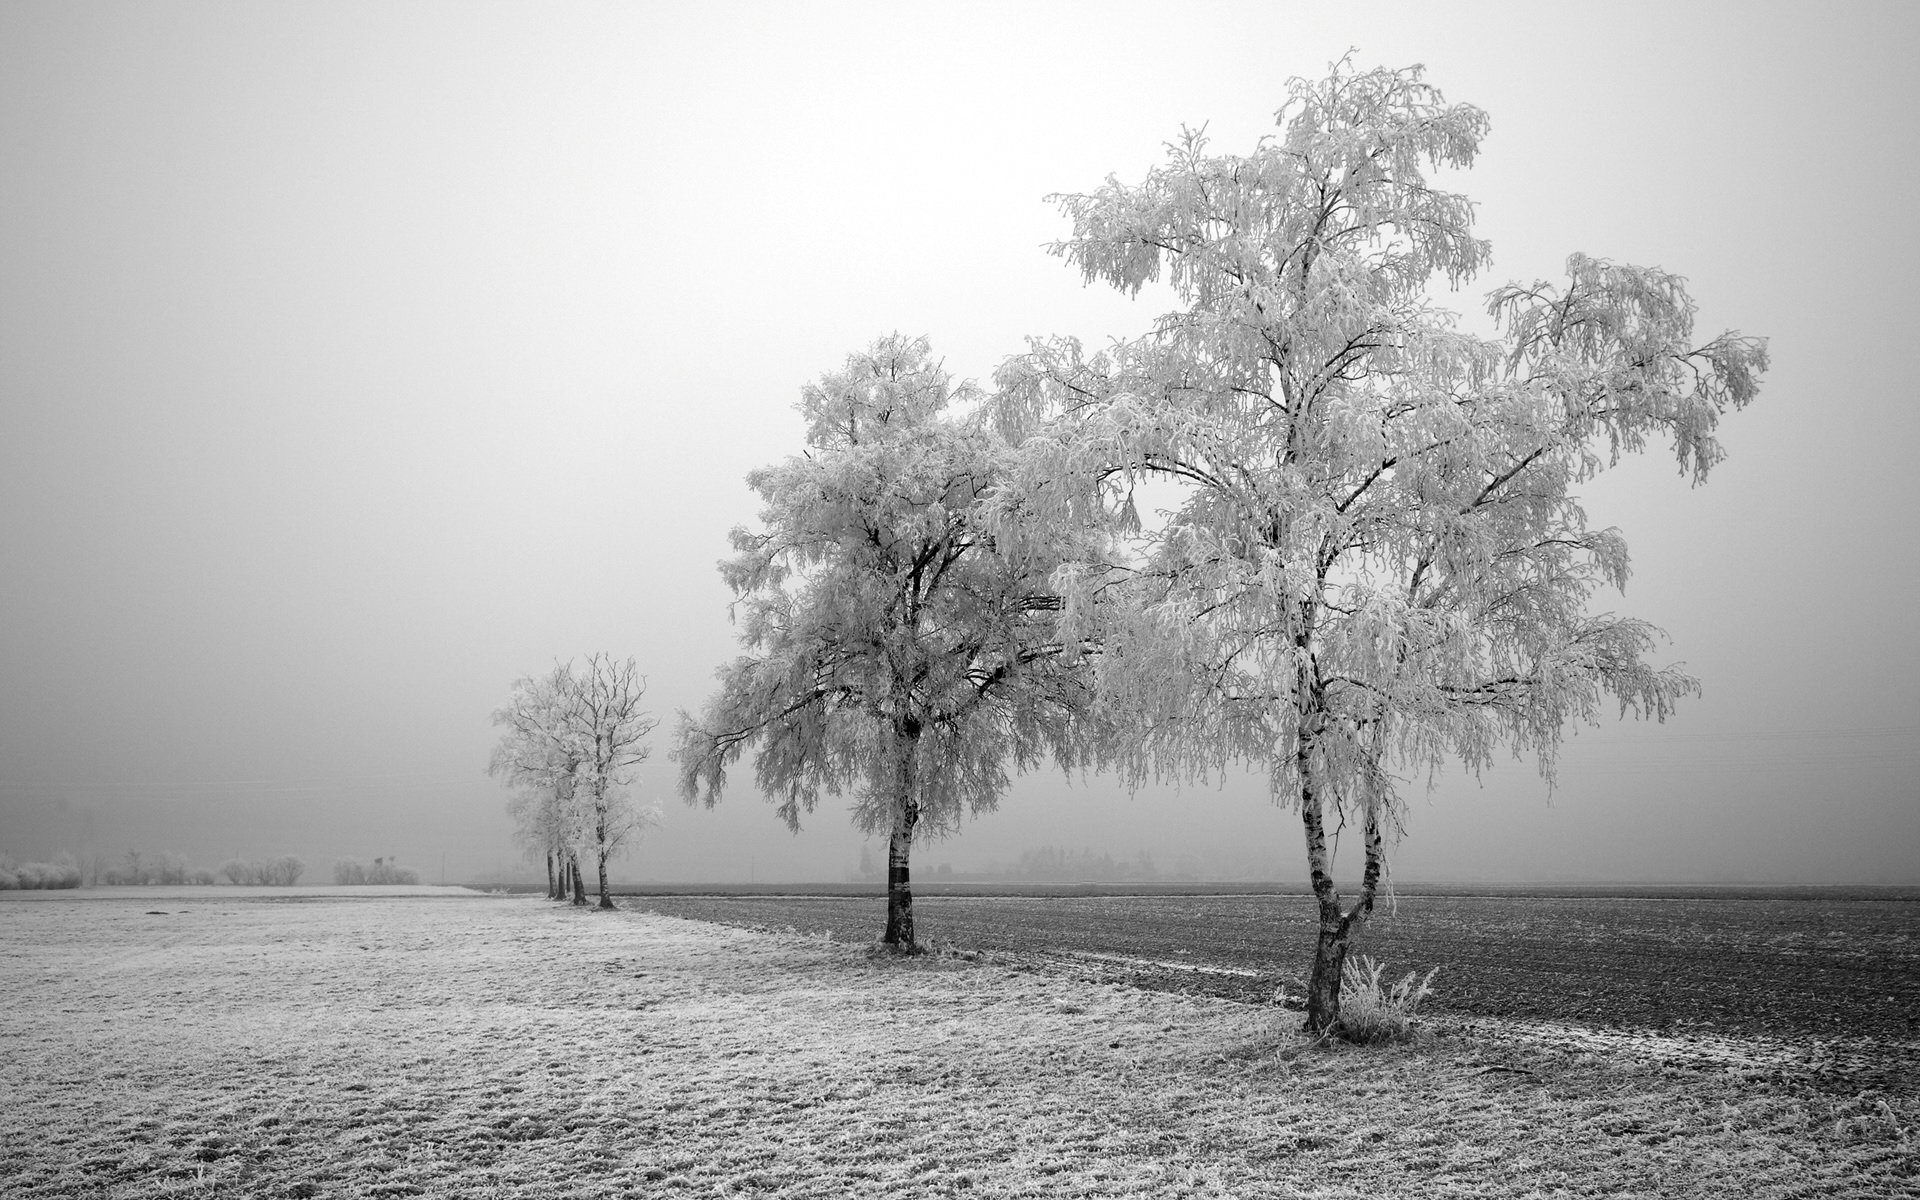 am in the winter of my soul All lies dead and quiet without color 1920x1200